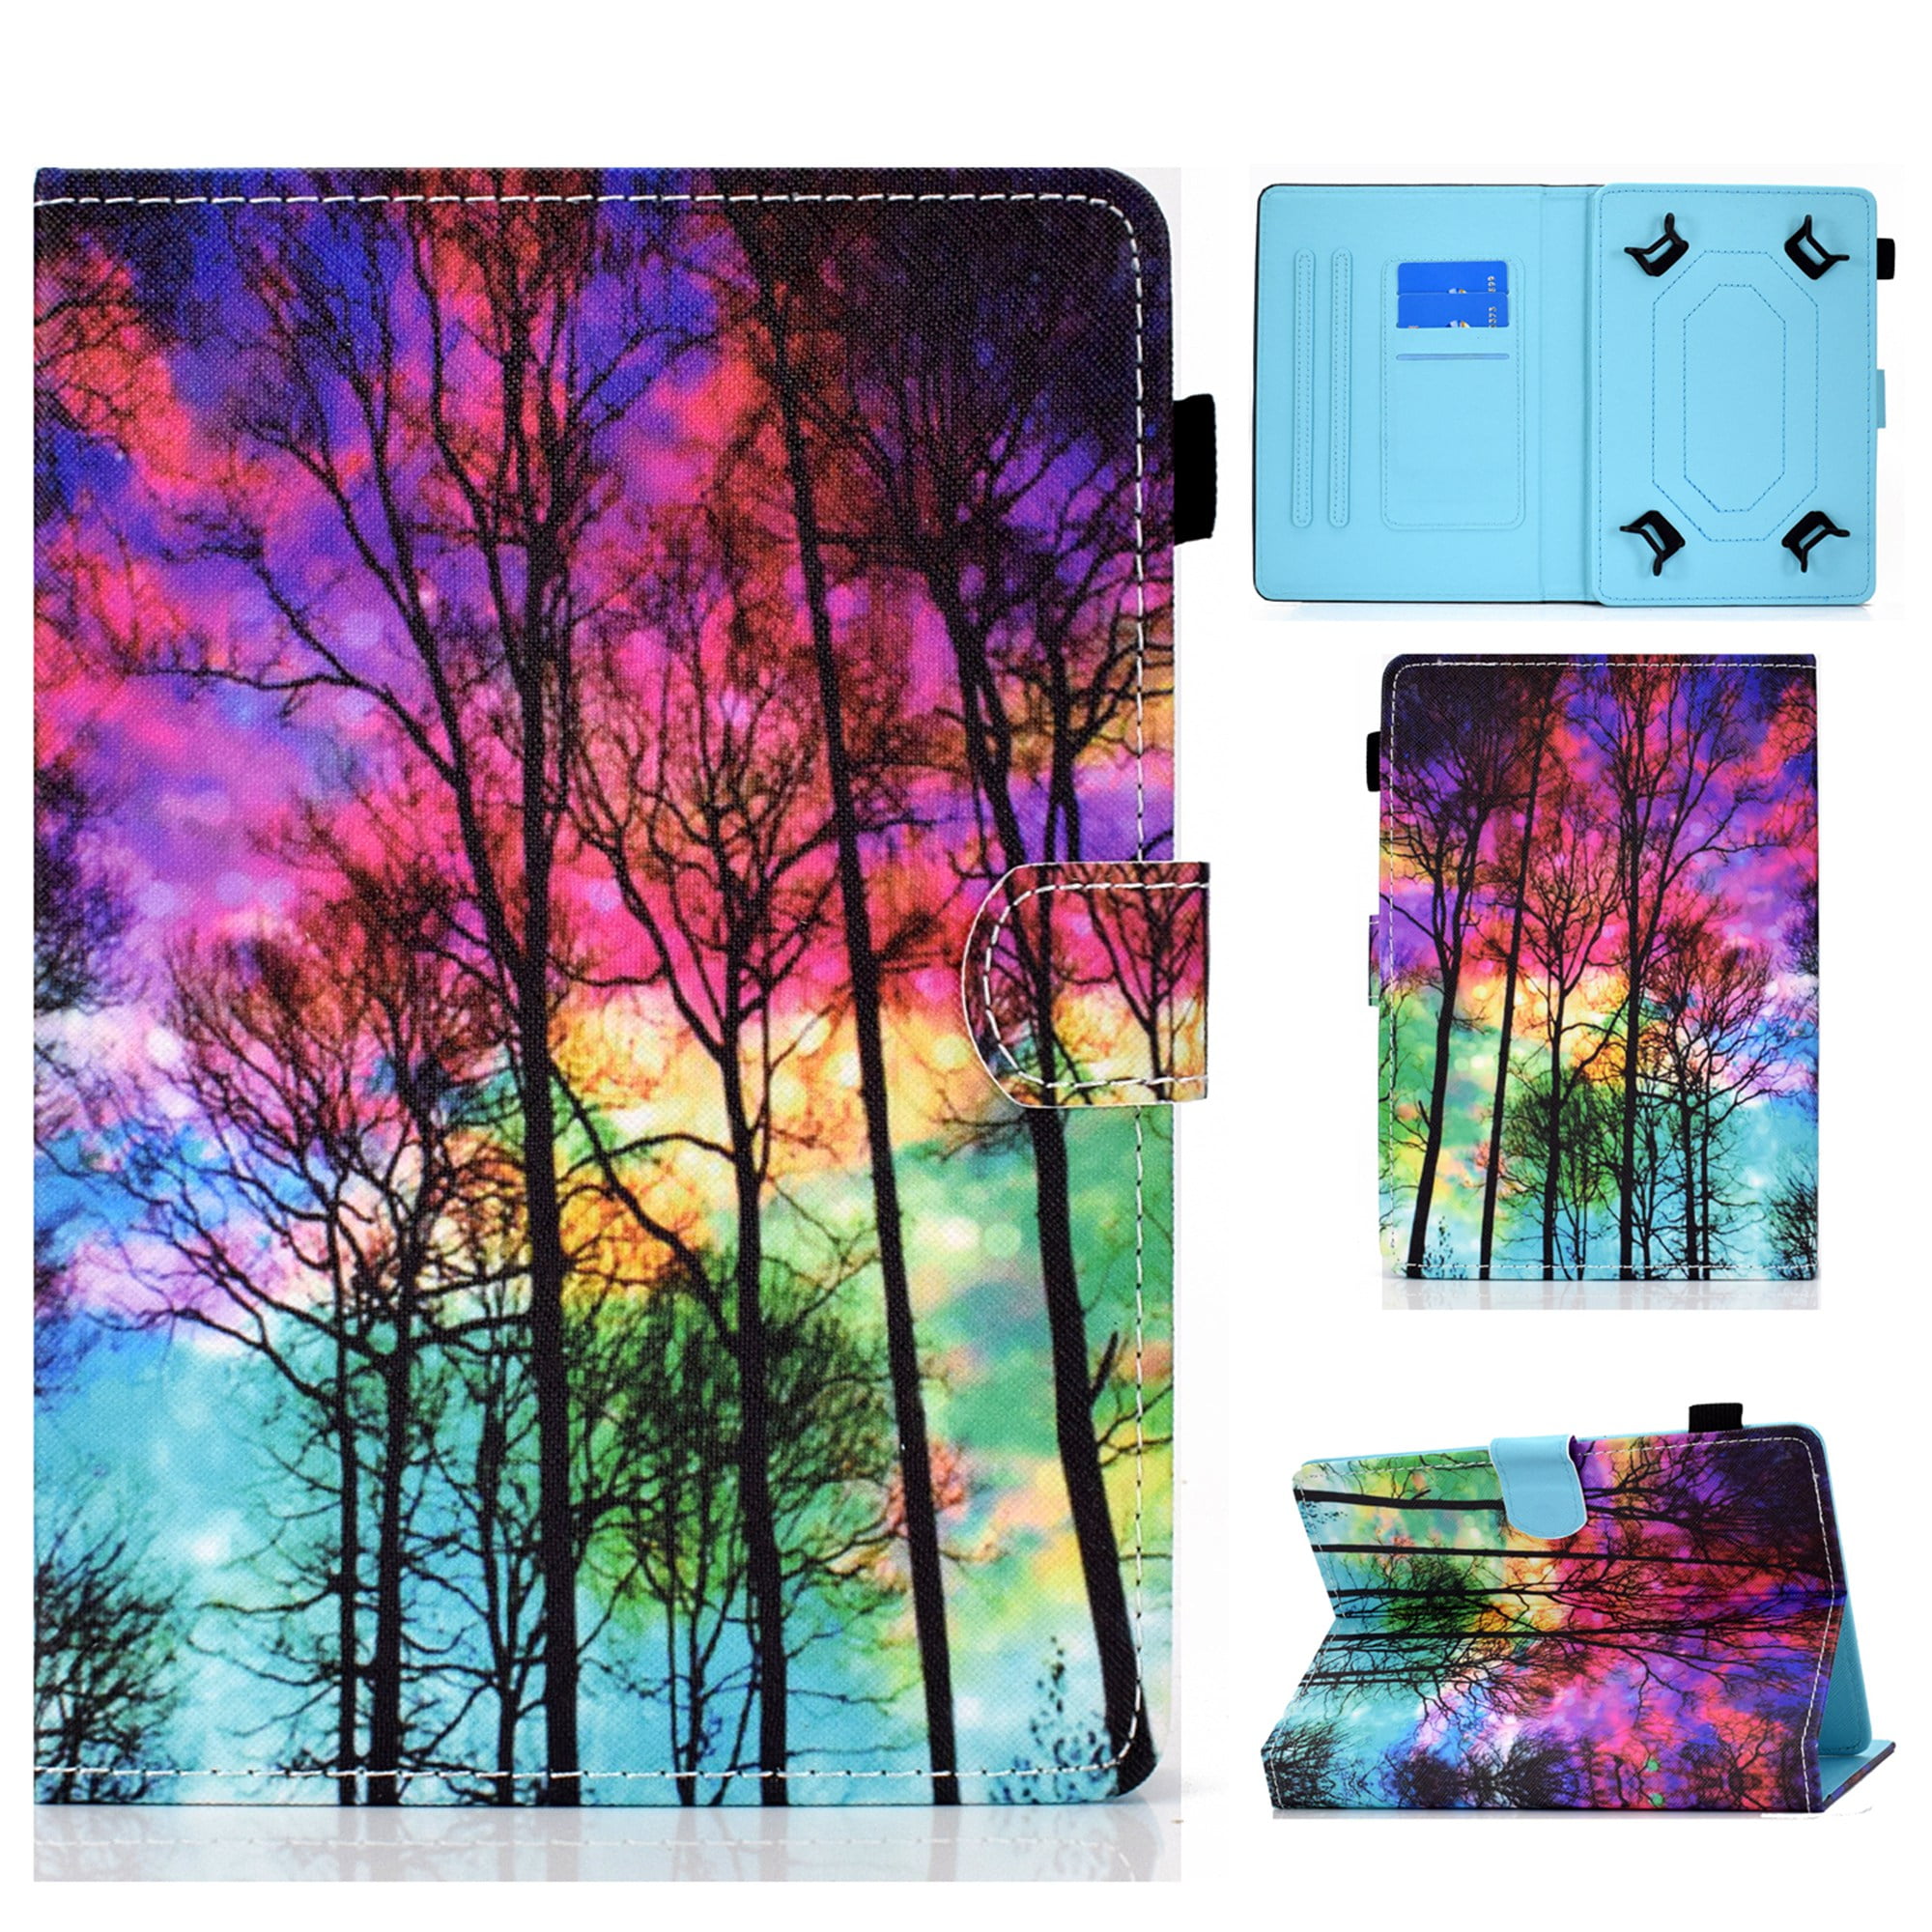 Tante medeleerling Beschietingen Universal 10" Tablet Case Flip Painted Leather Folio Stand Cover For iPad  9.7 / Samsung Tab A 10.1 / Amazon Fire HD 10.1 - Walmart.com